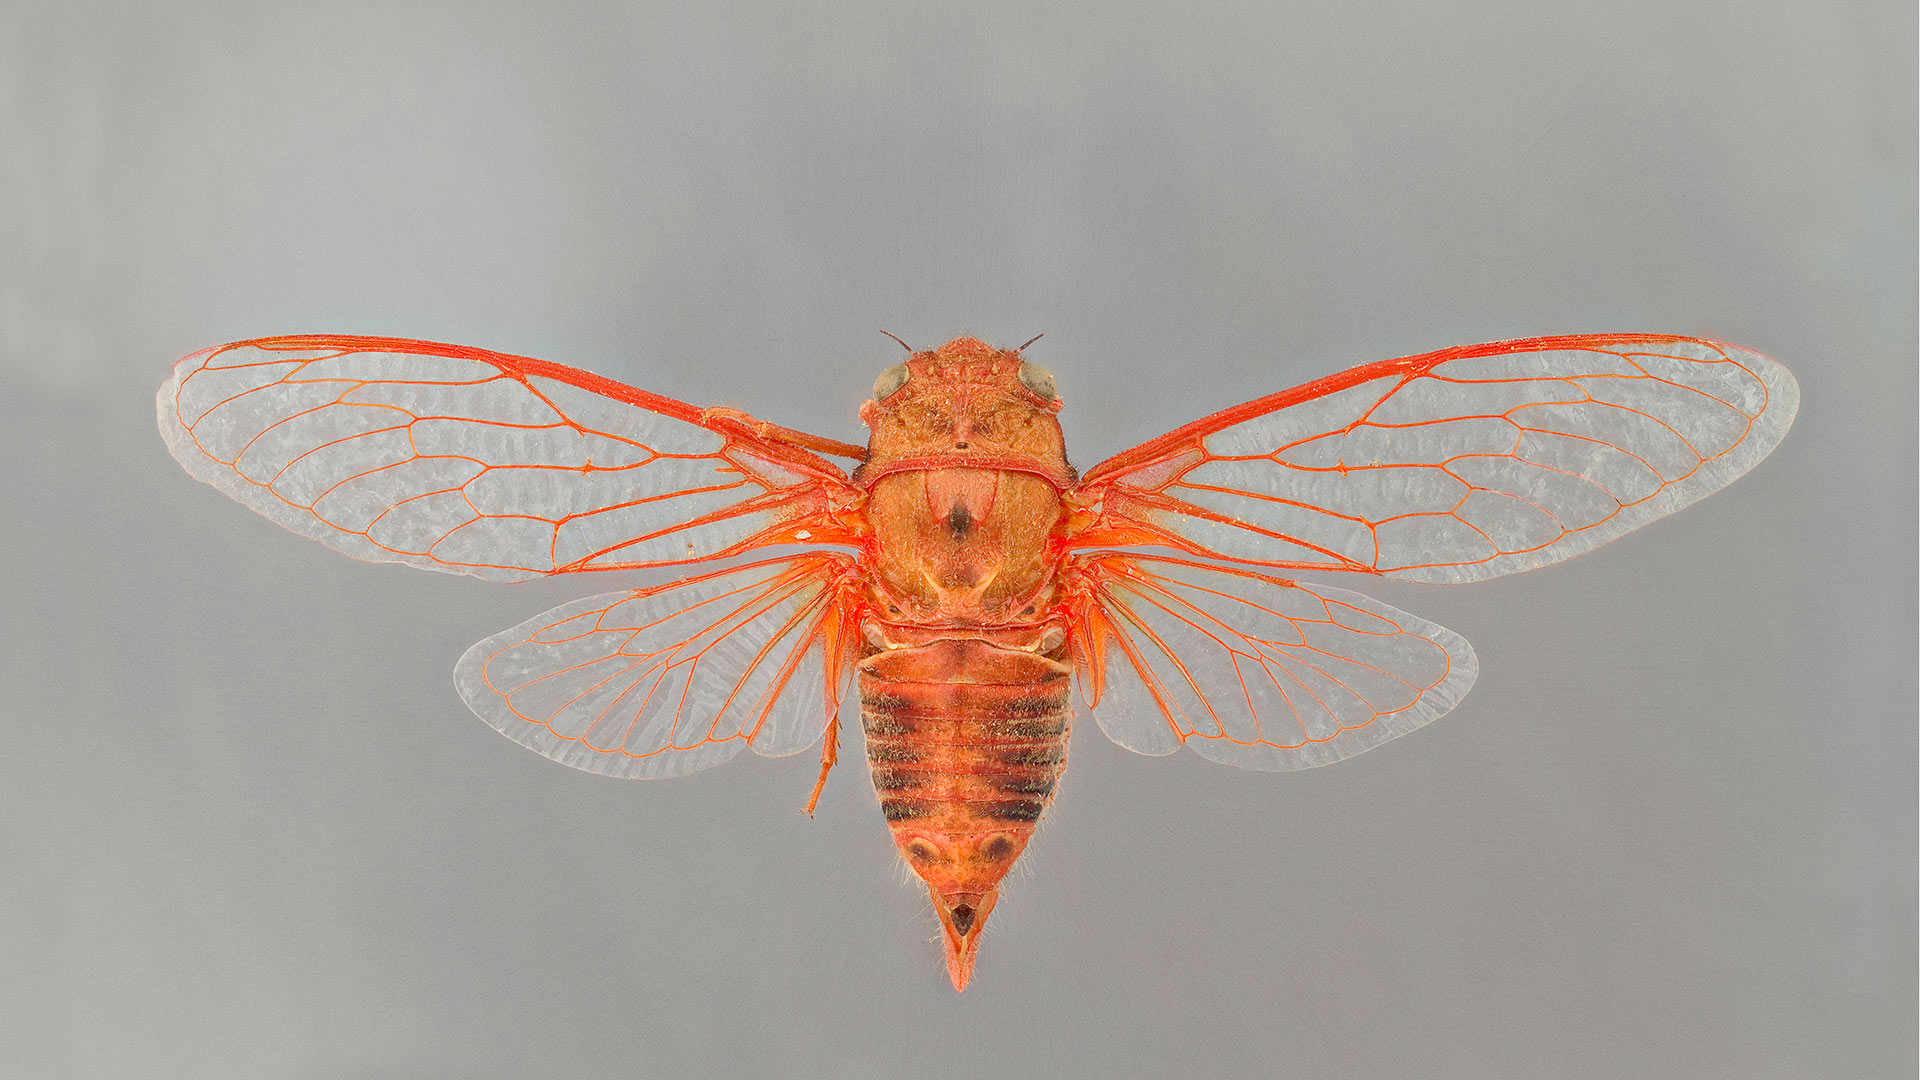 Okanaga rubrovenosa is one of the most prominent cicada species found in the Southwest U.S.